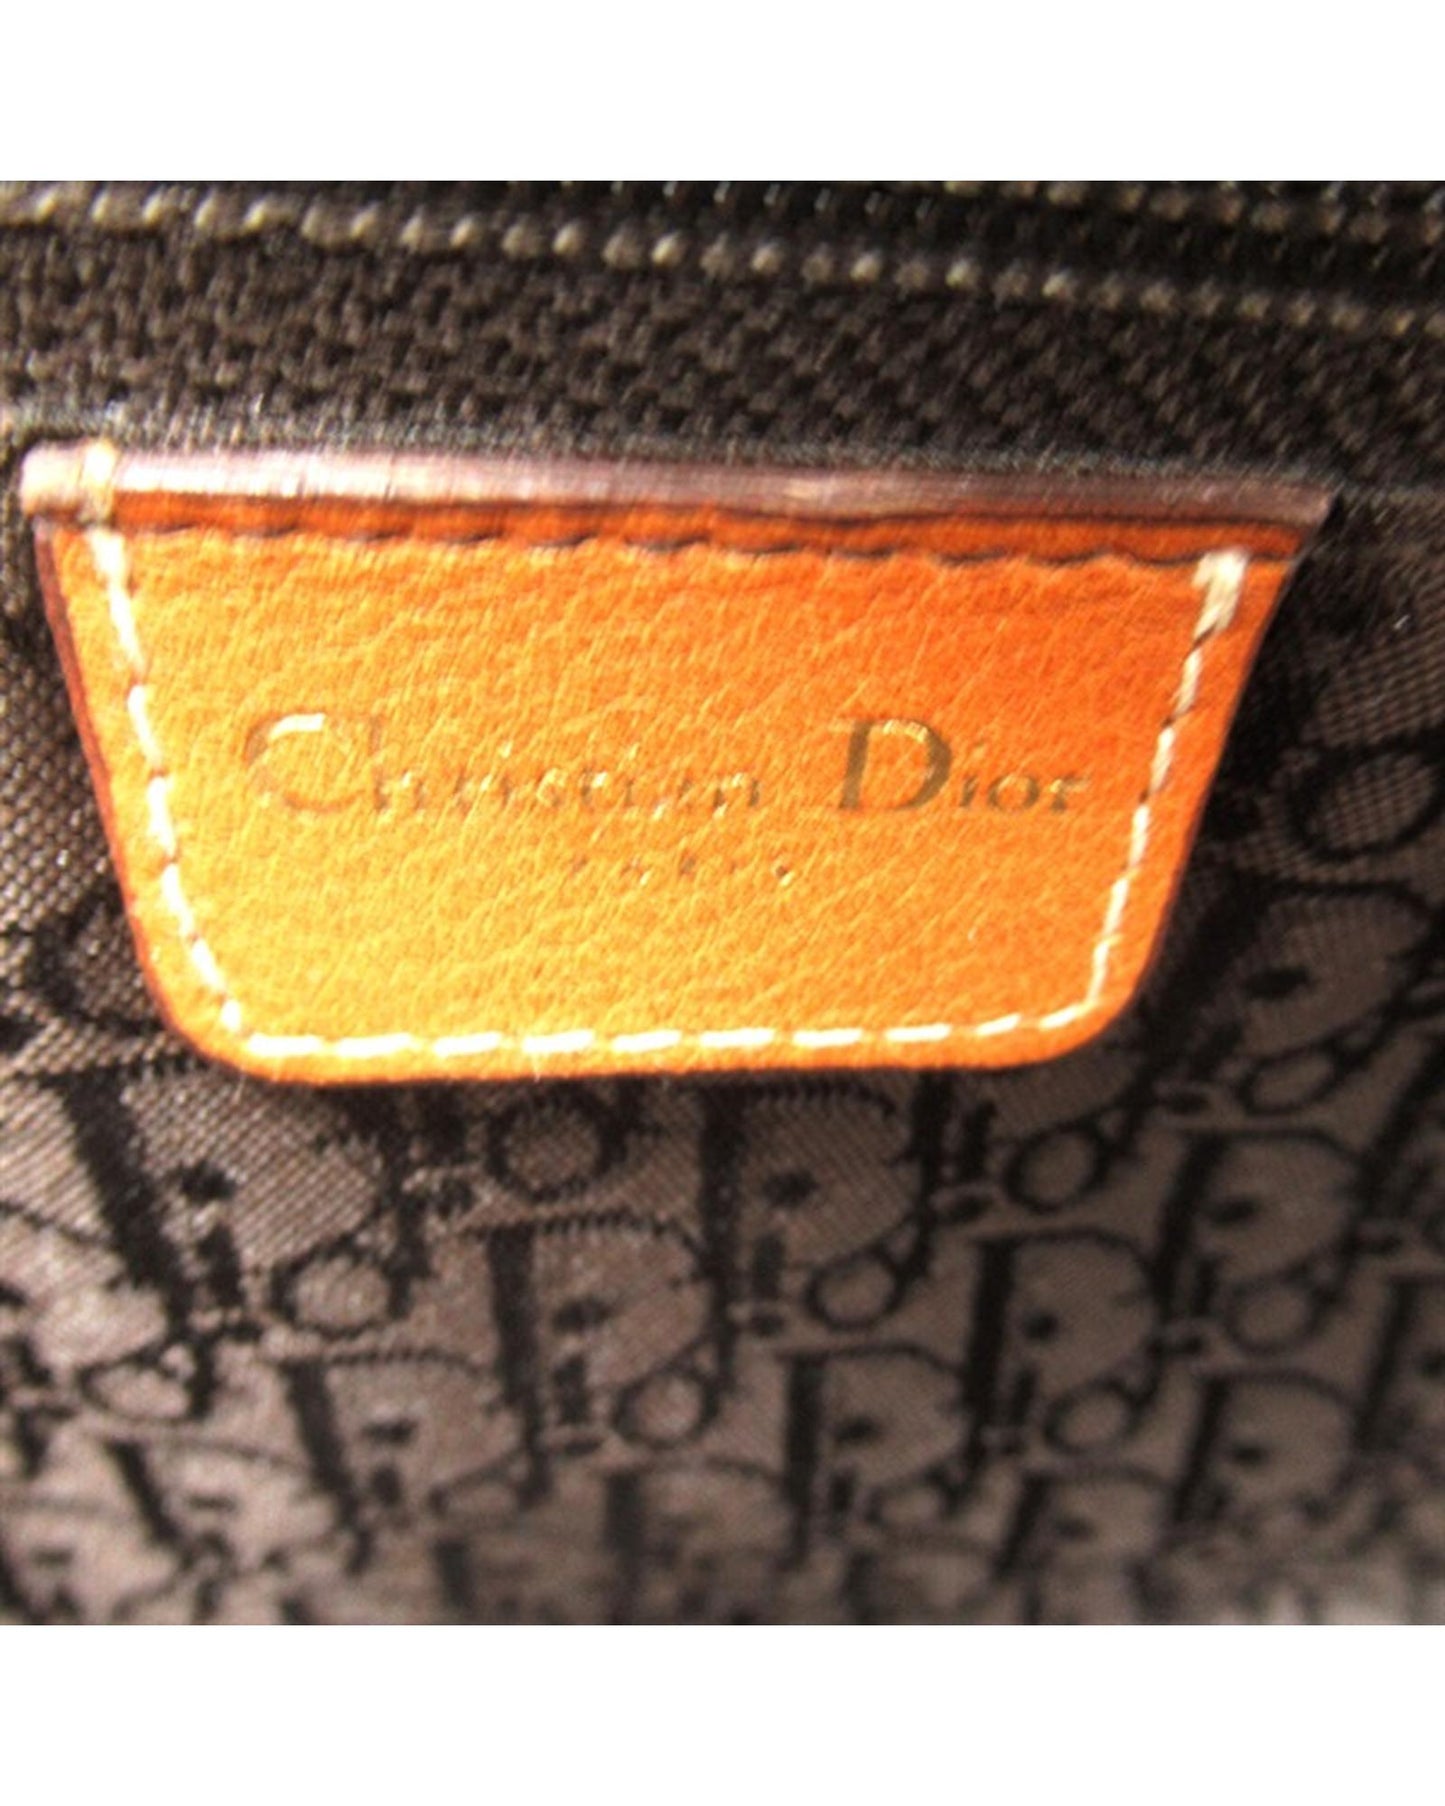 Dior Women's Brown Leather Lady Dior Bag - Excellent Condition in Brown